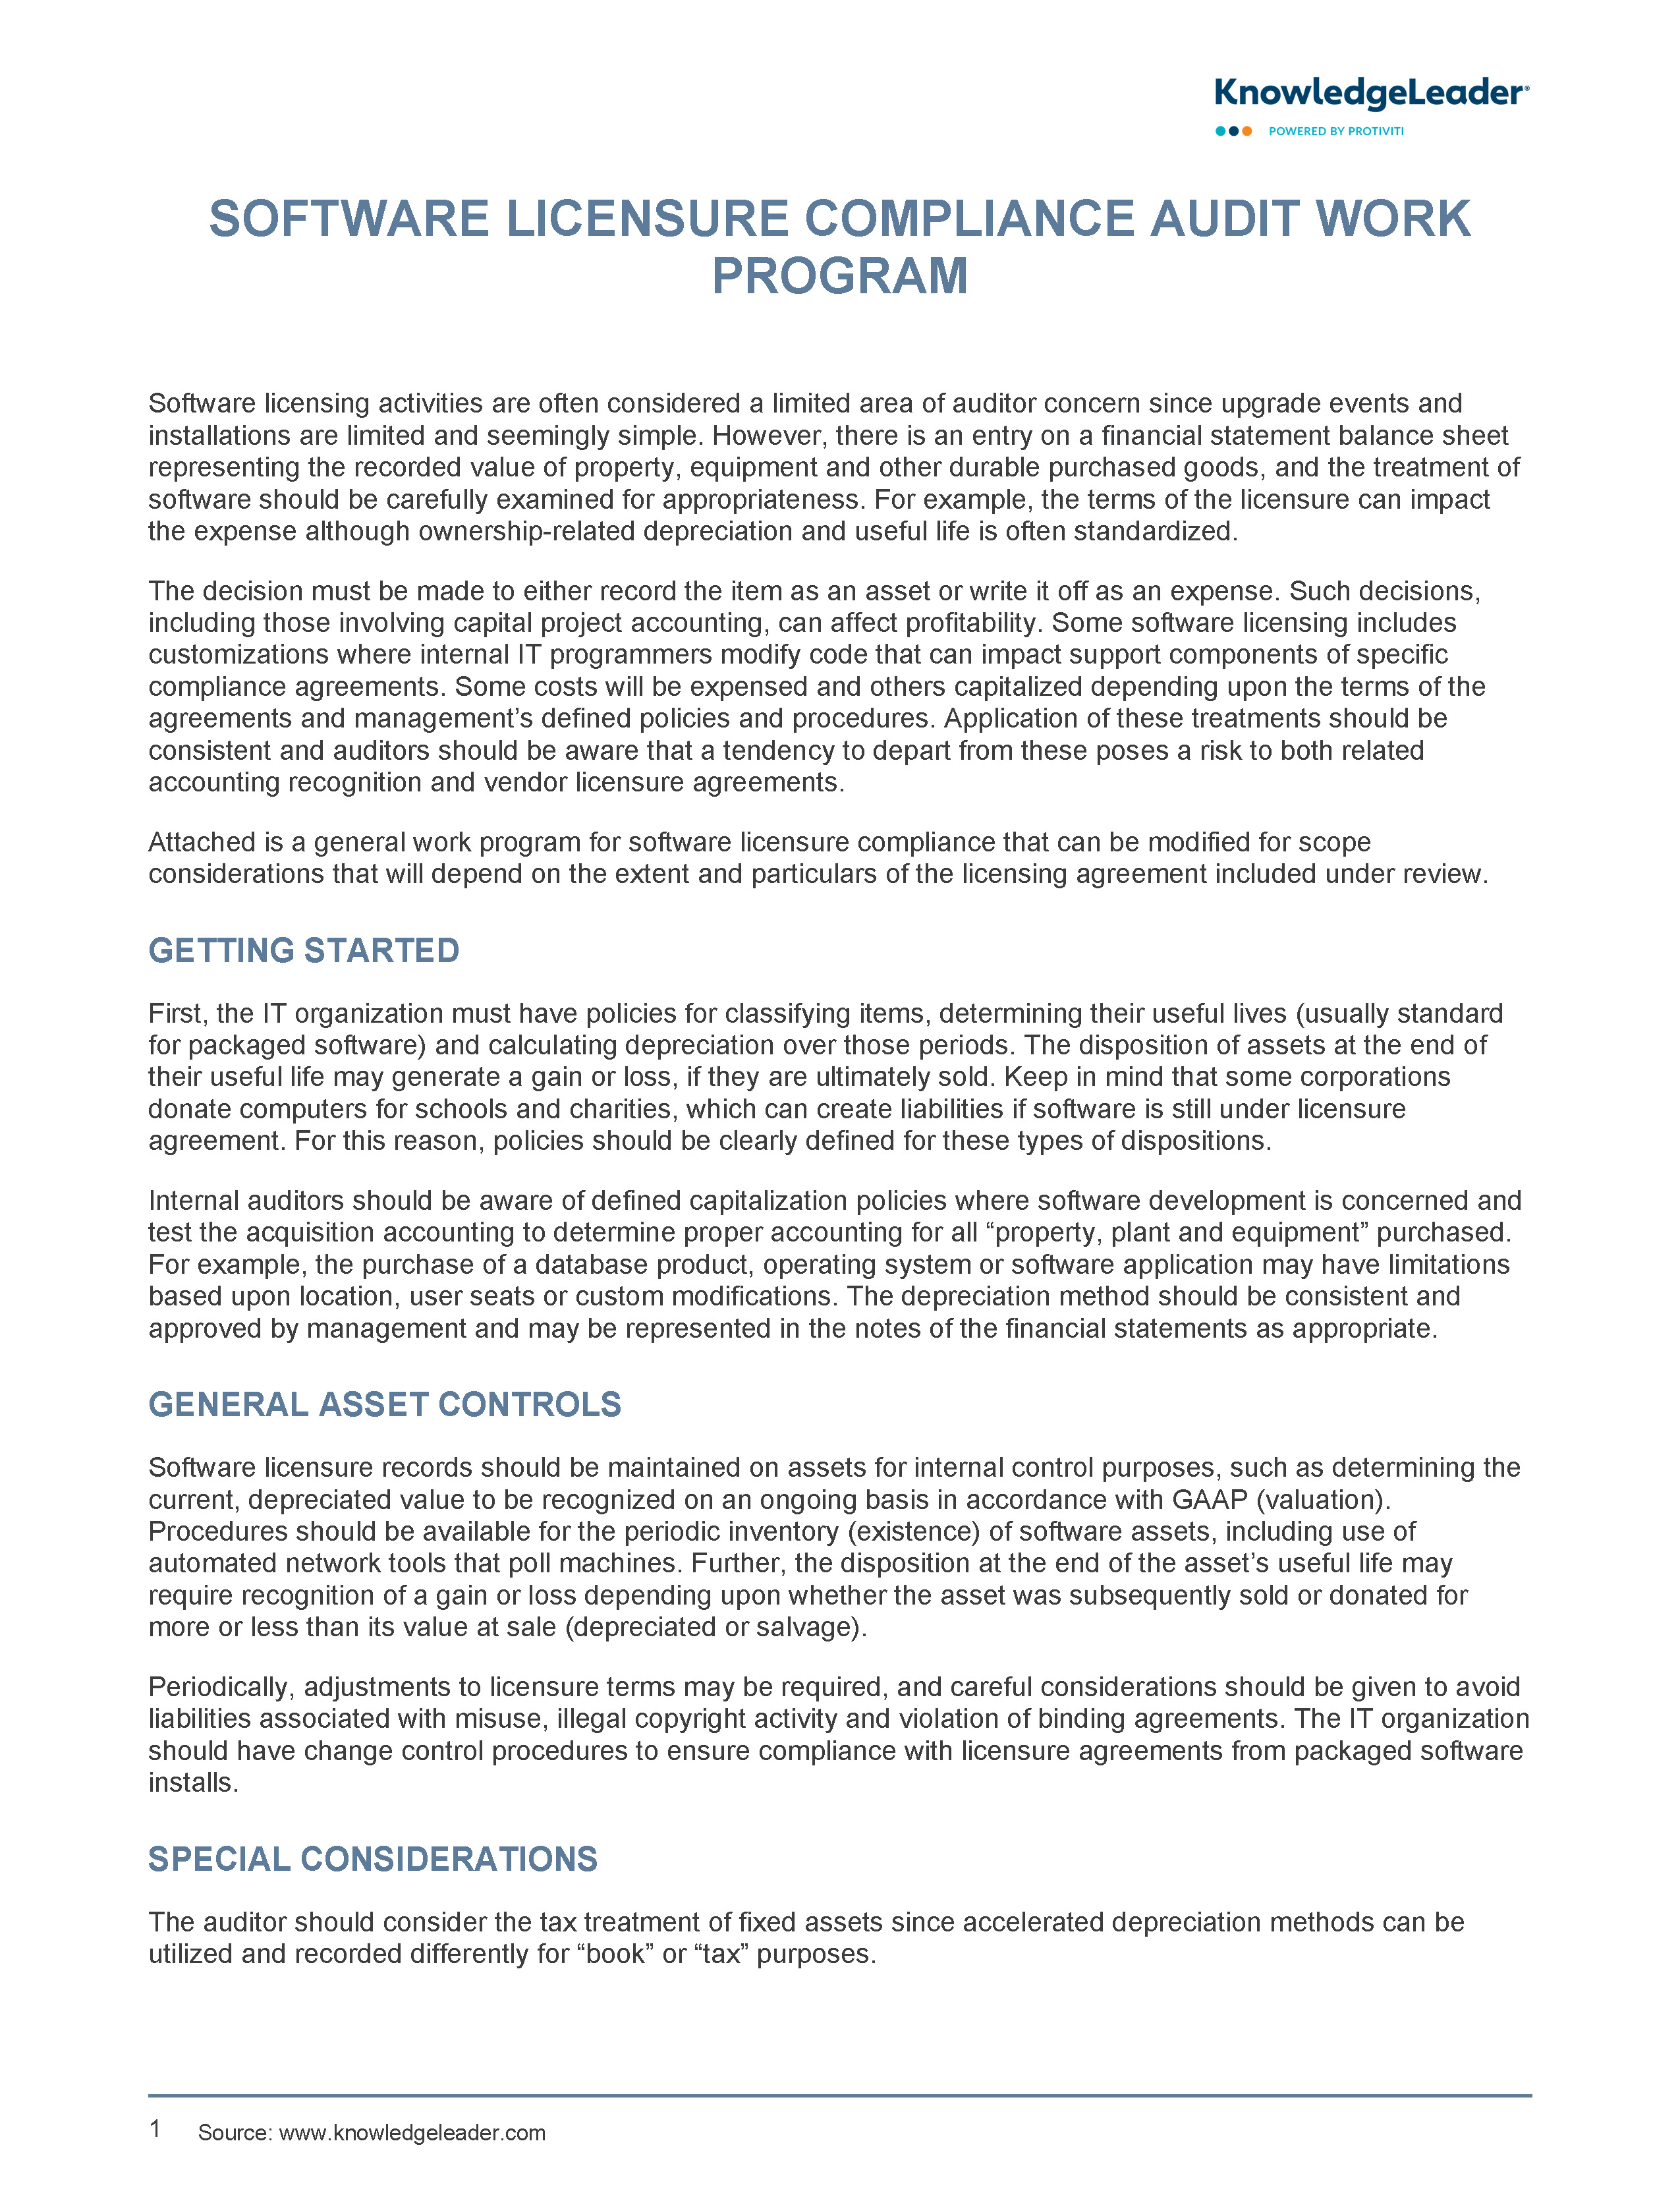 Screenshot of the first page of Software Licensure Compliance_work program